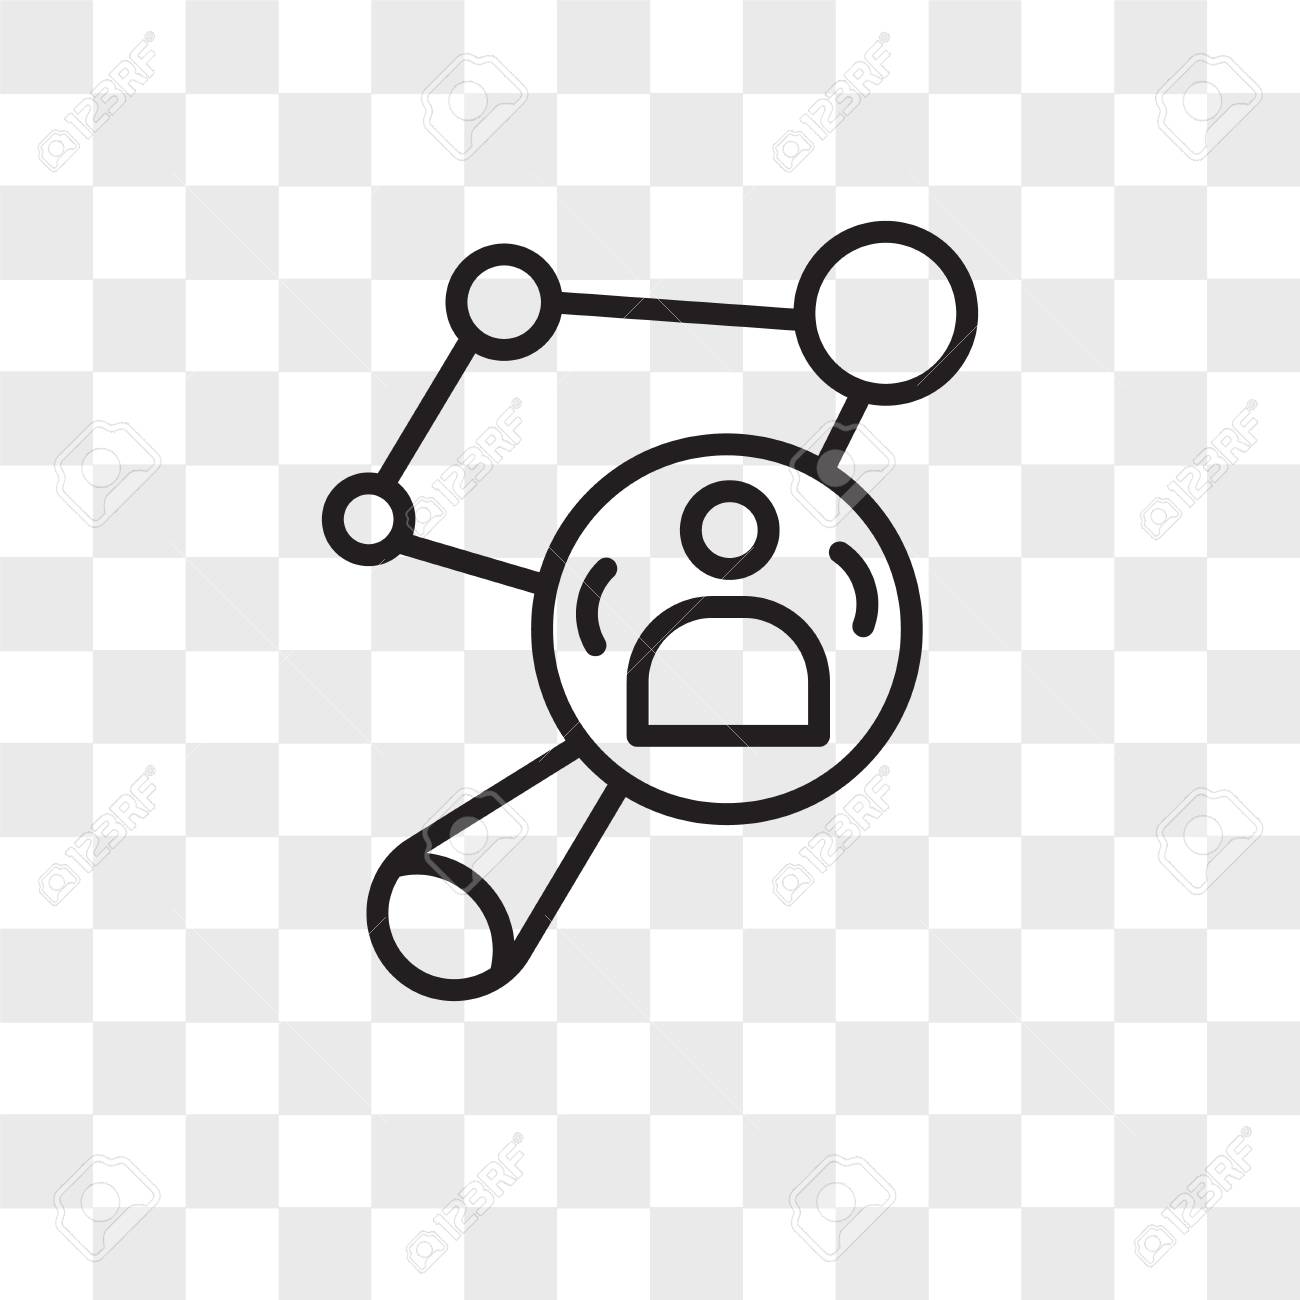 Insight Vector Icon Isolated On Transparent Background